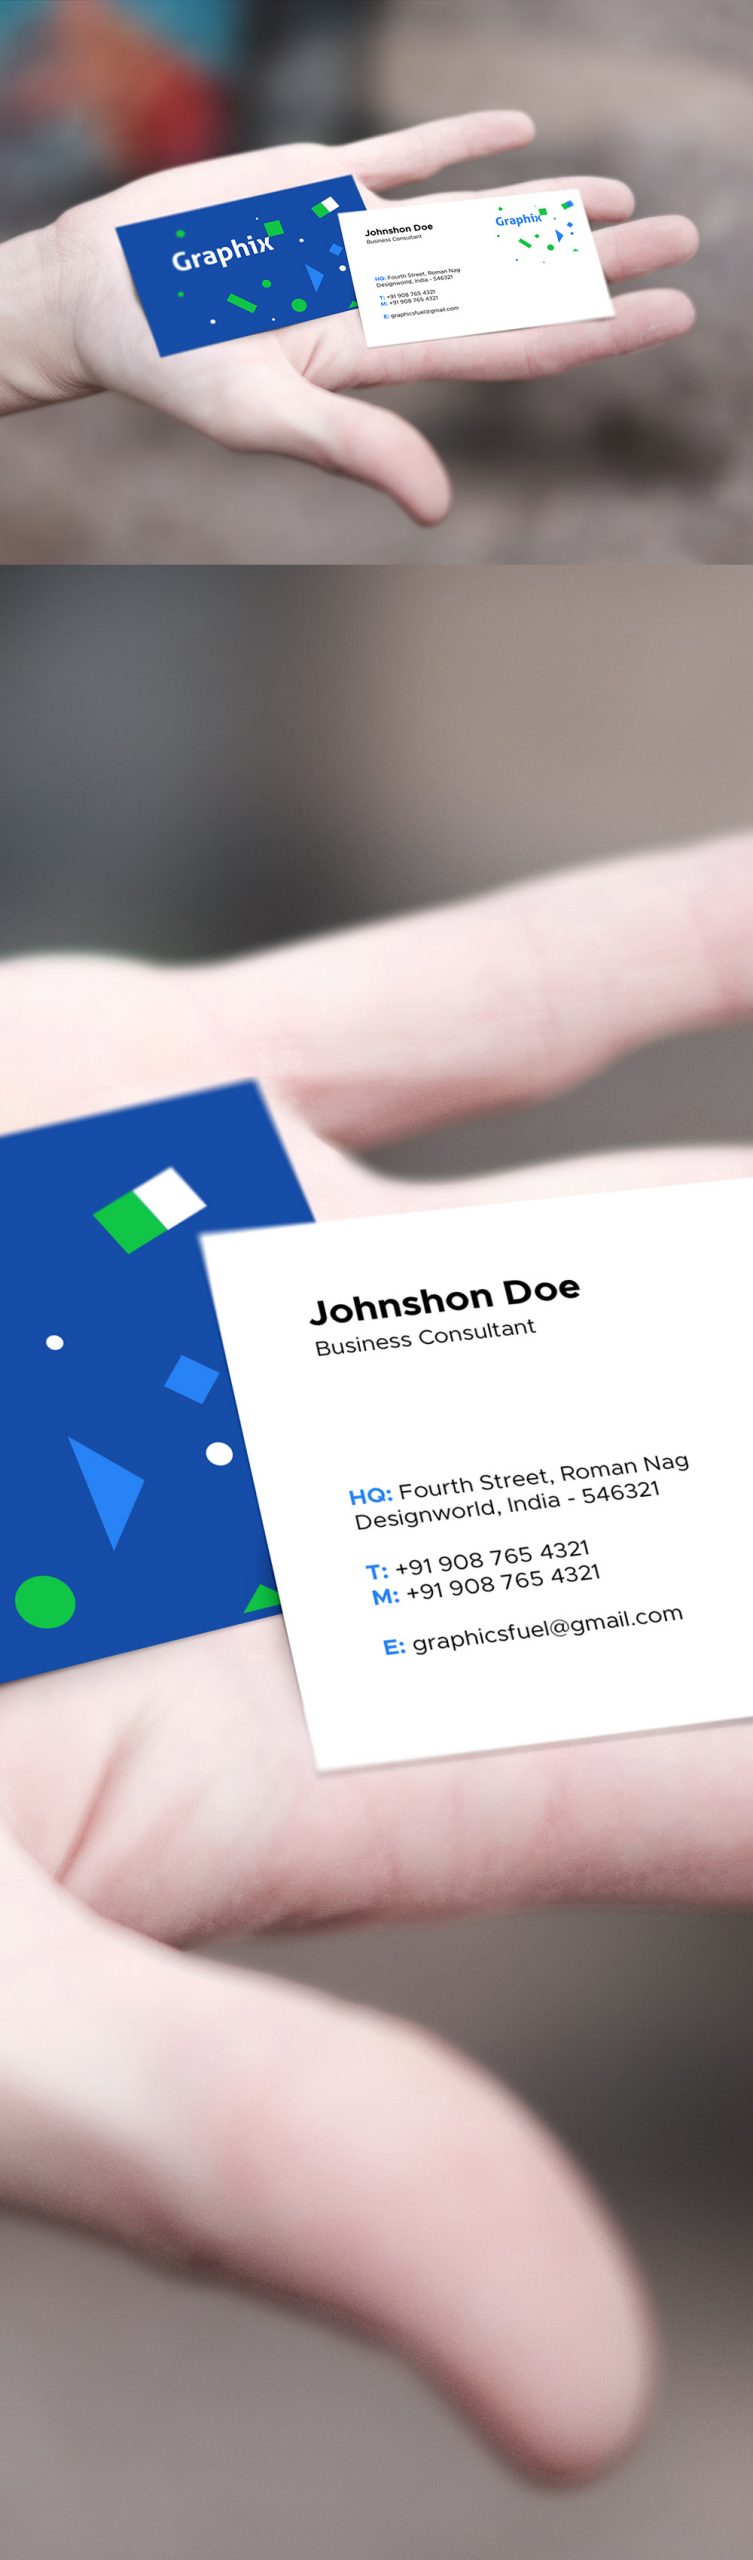 Business Card In Hand Mockup Free Download